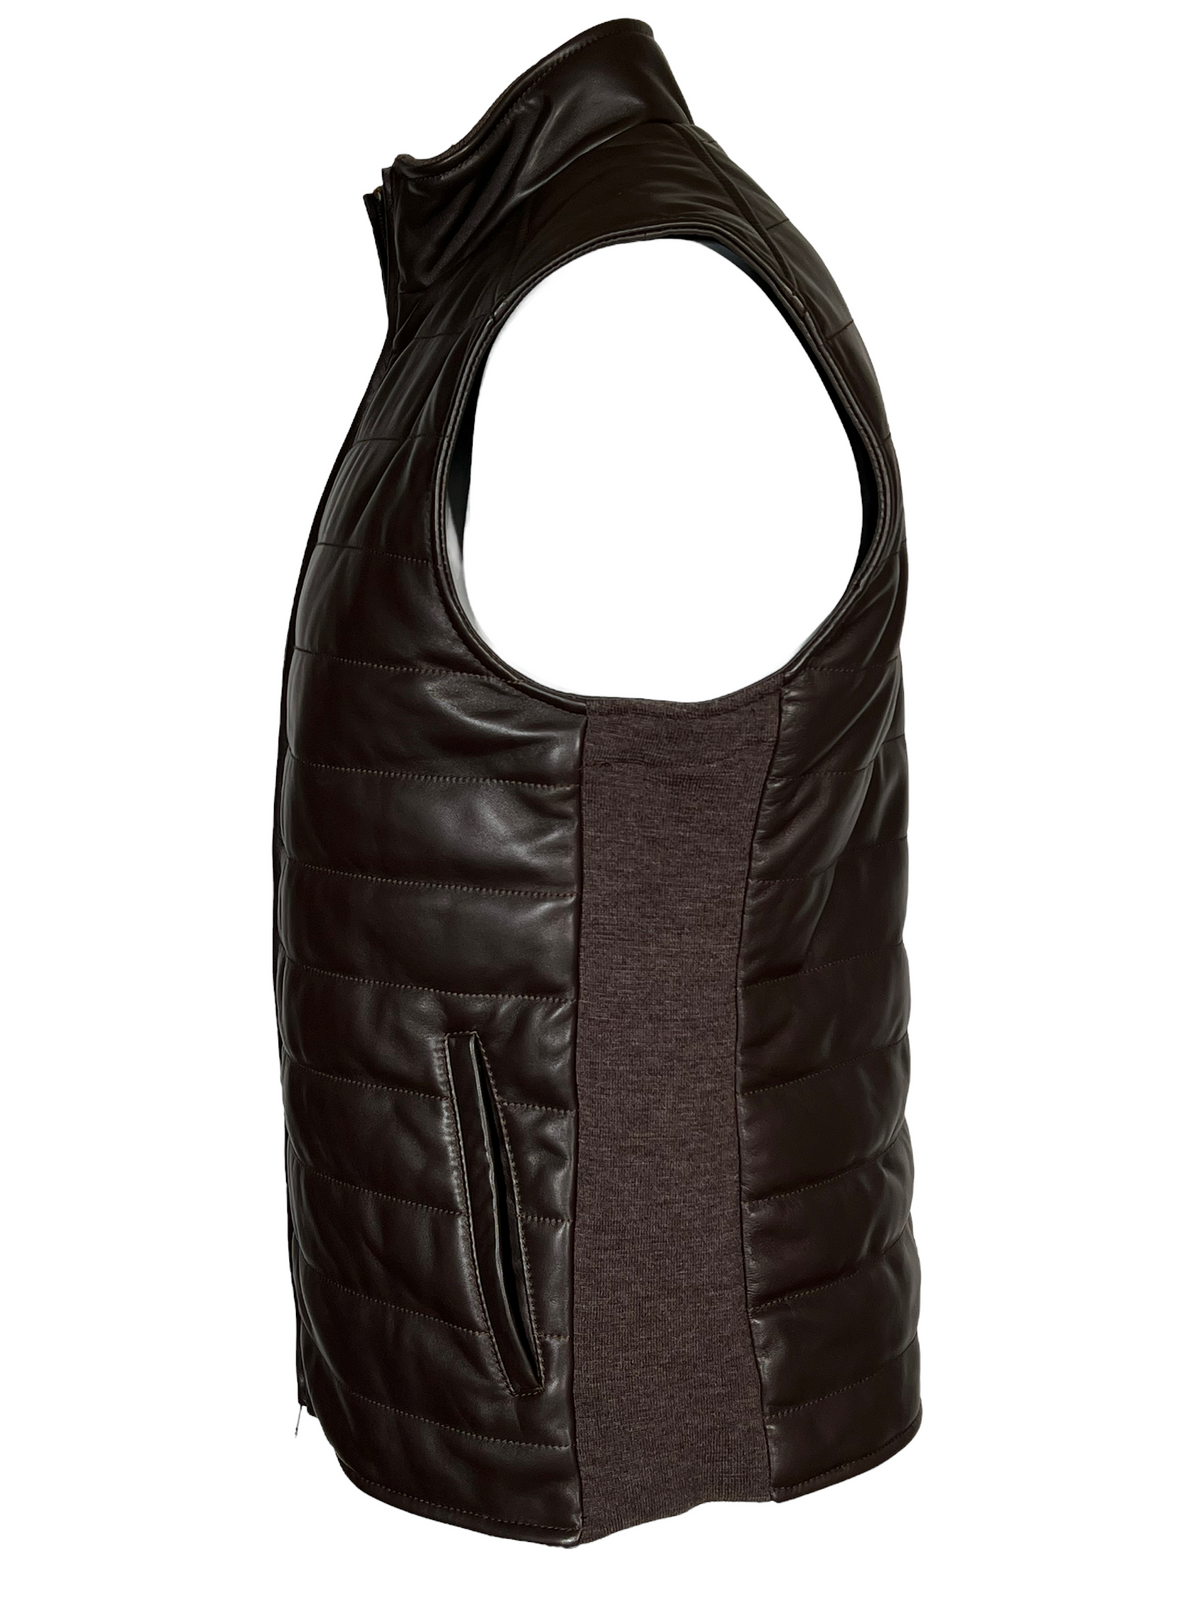 LUCIANO BARBERA QUILTED LEATHER VEST - BROWN